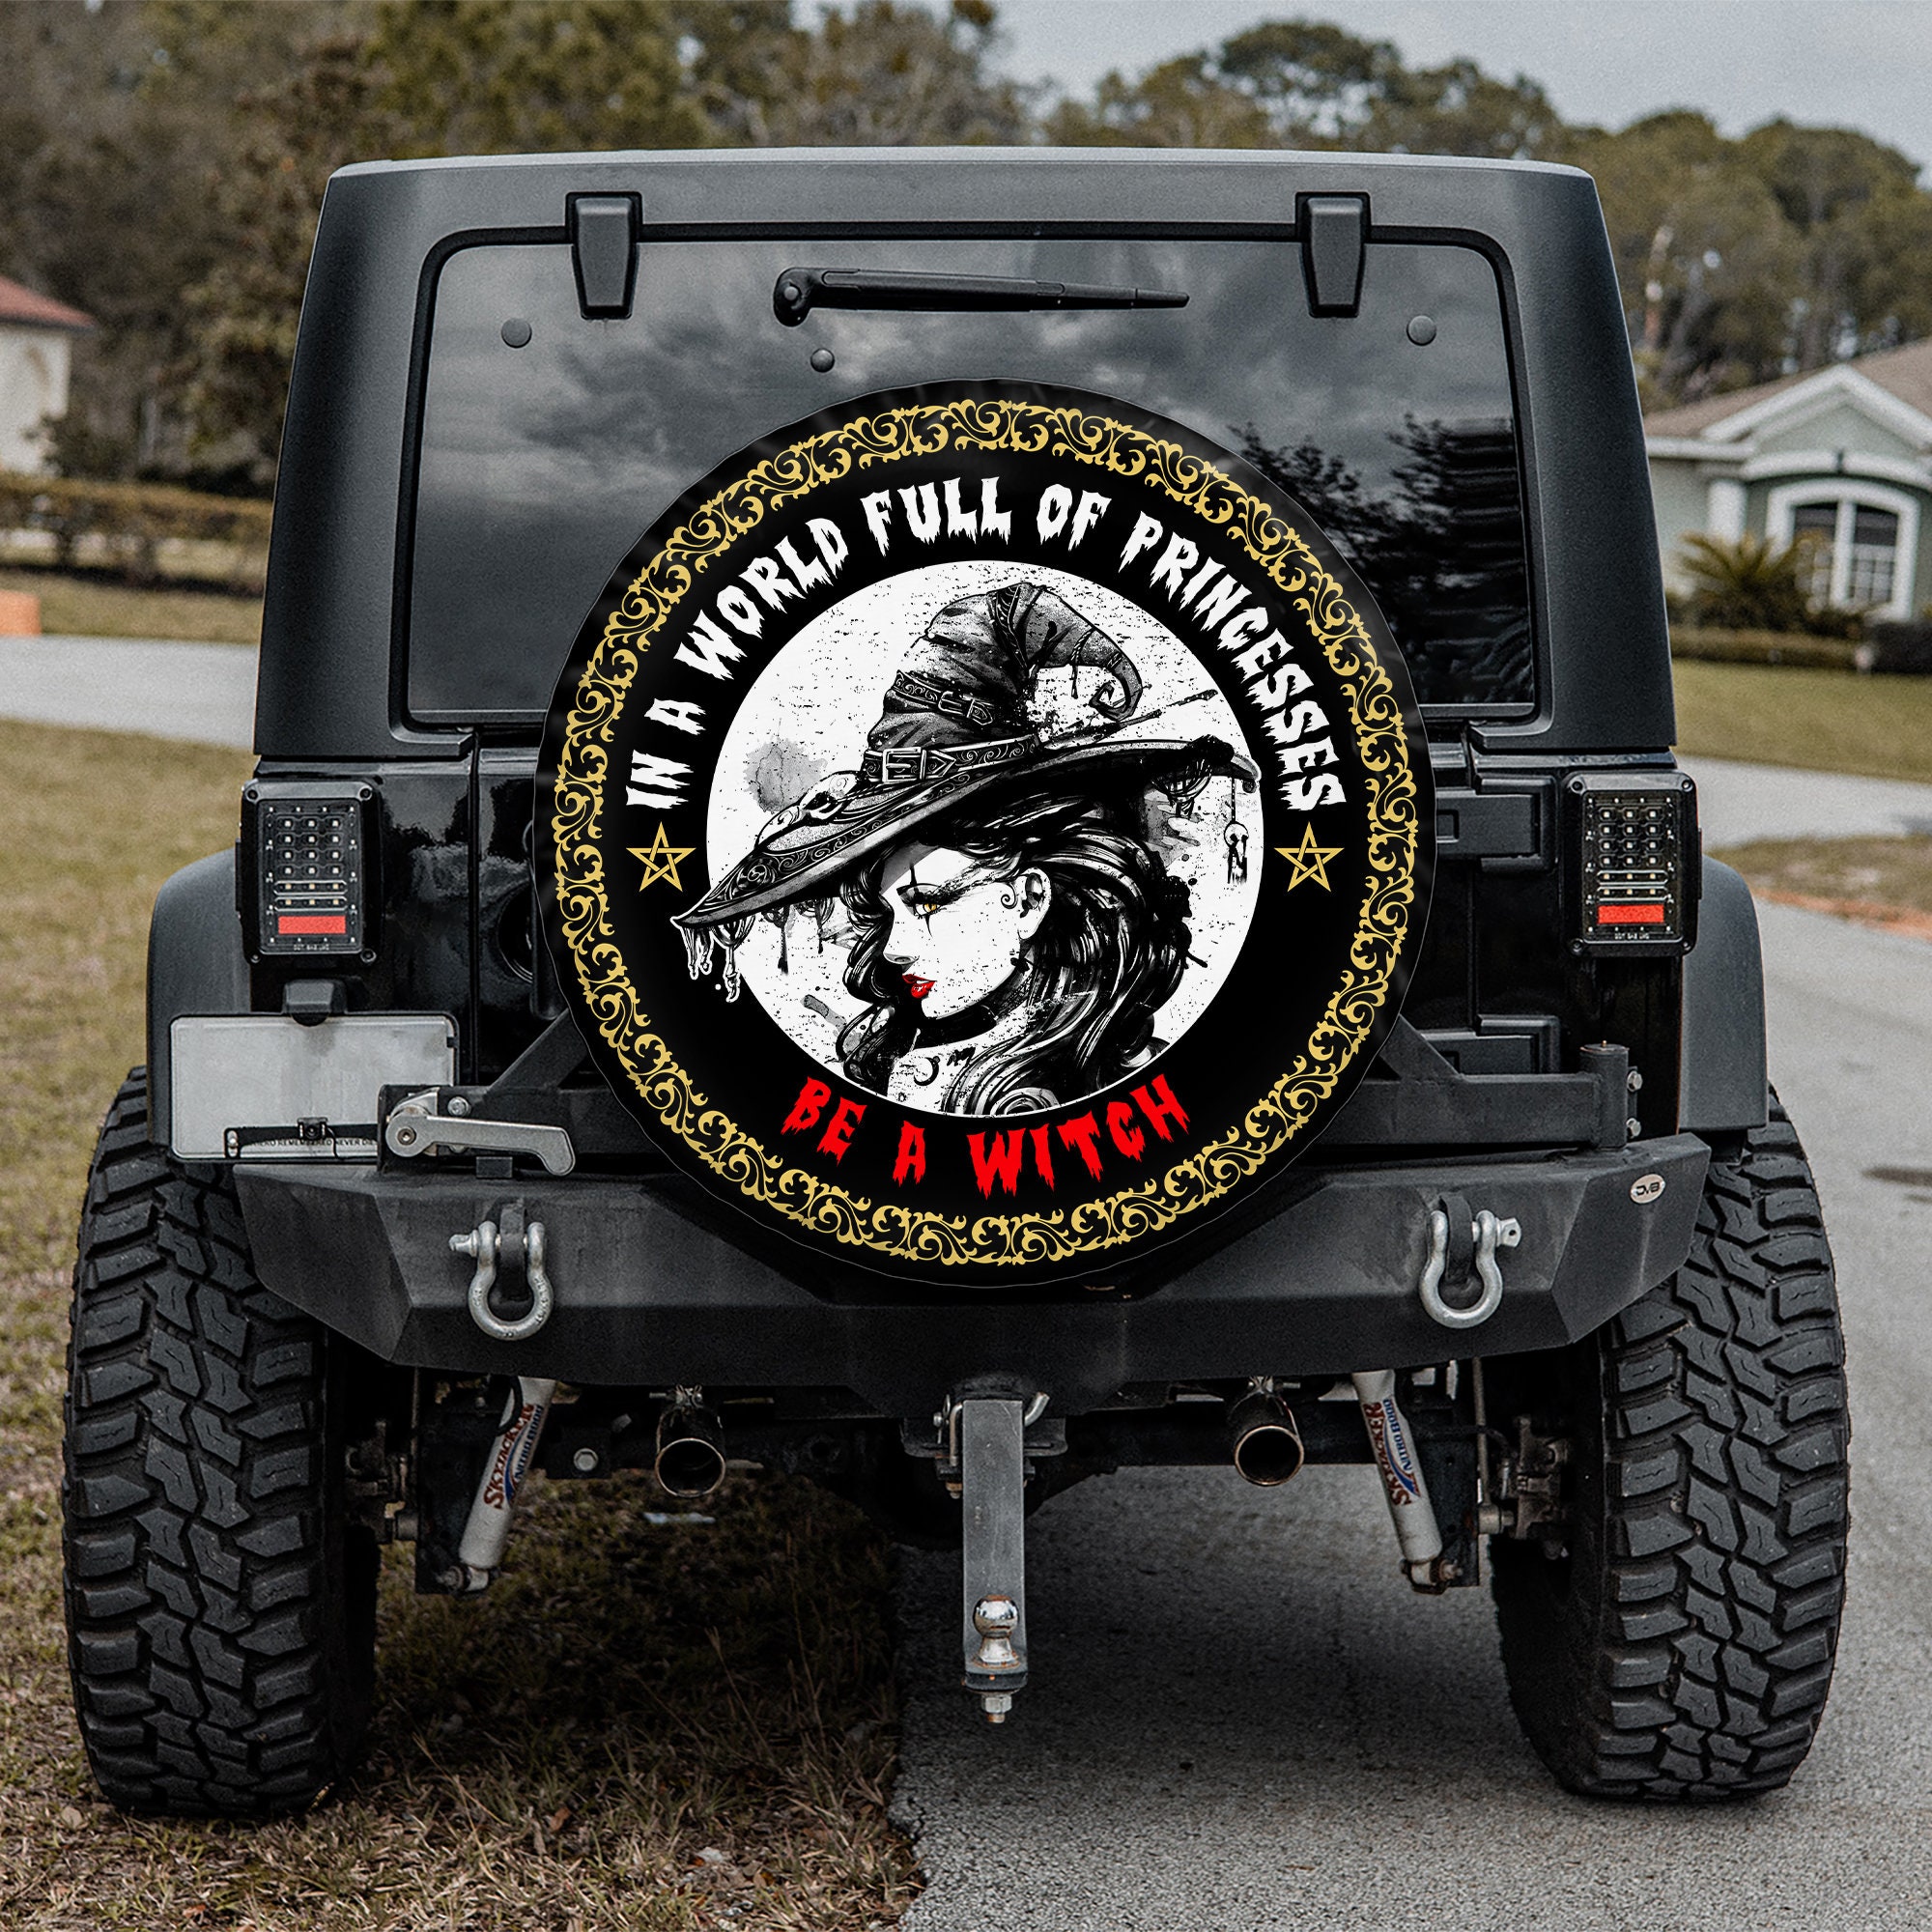 Discover Halloween Tire Cover - In A World Full Of Princesses Be A Witch, Camper Spare Tire Cover